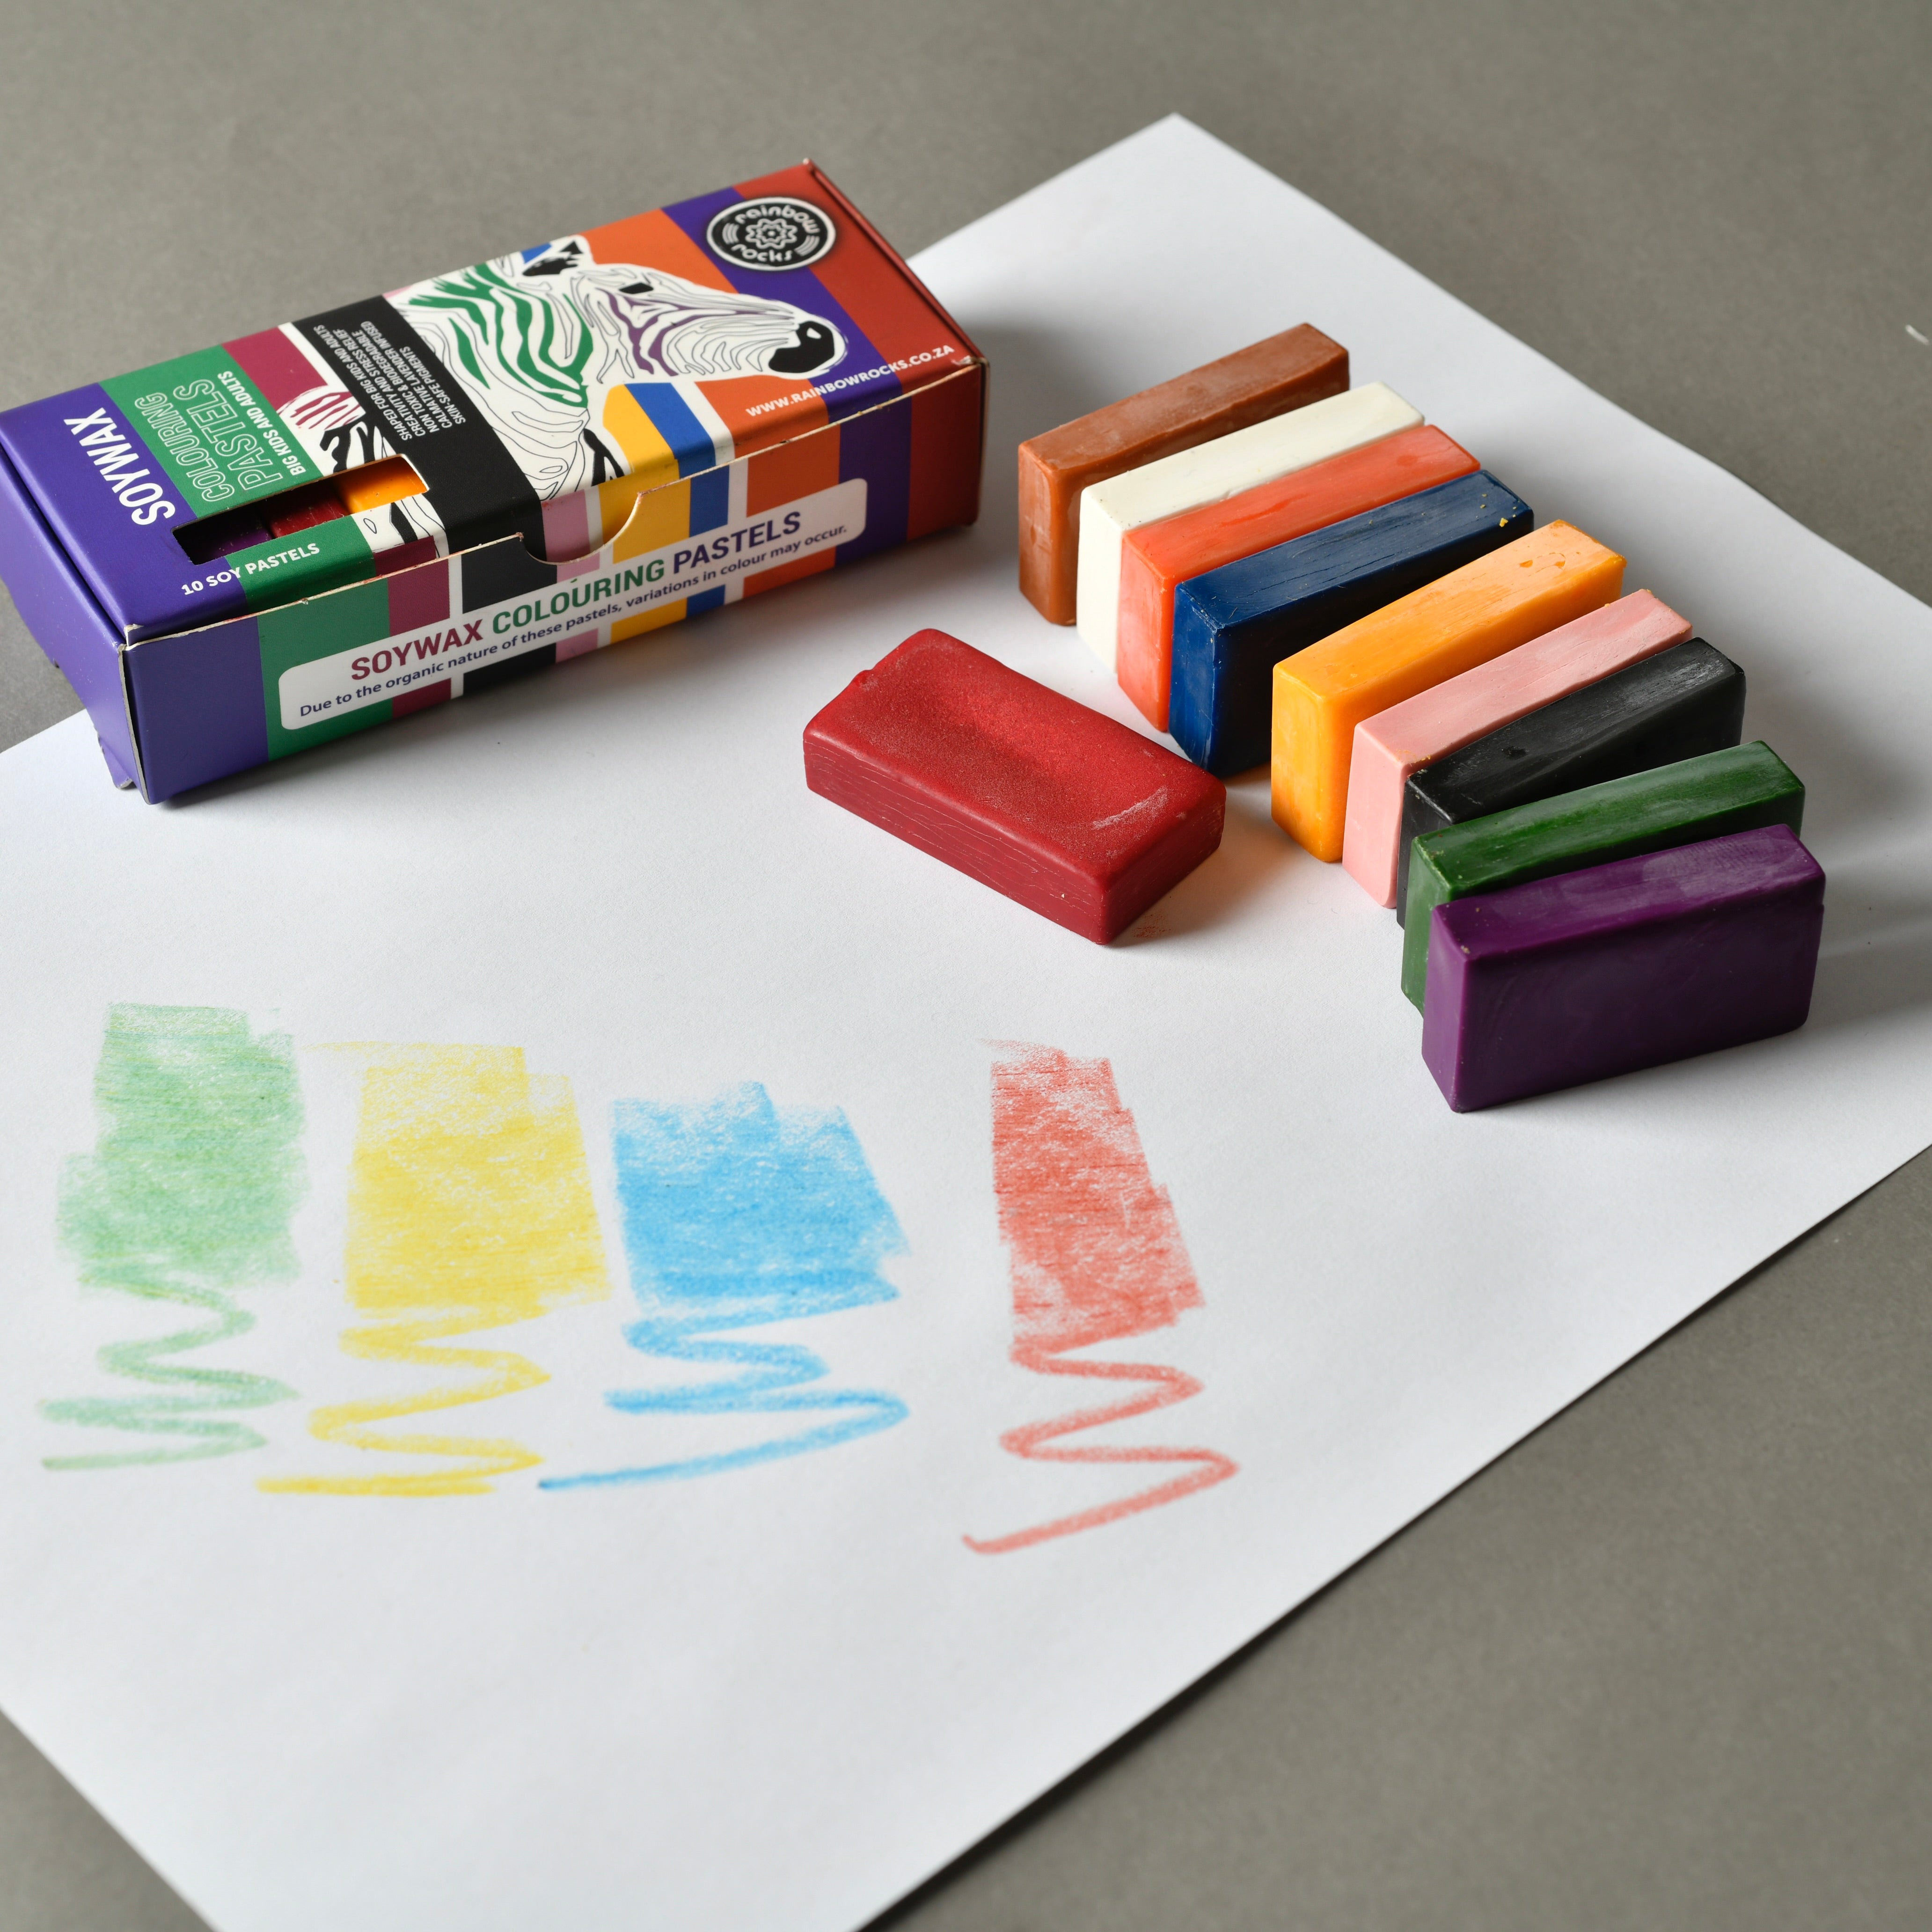 Soy Crayons and Soy Pastels